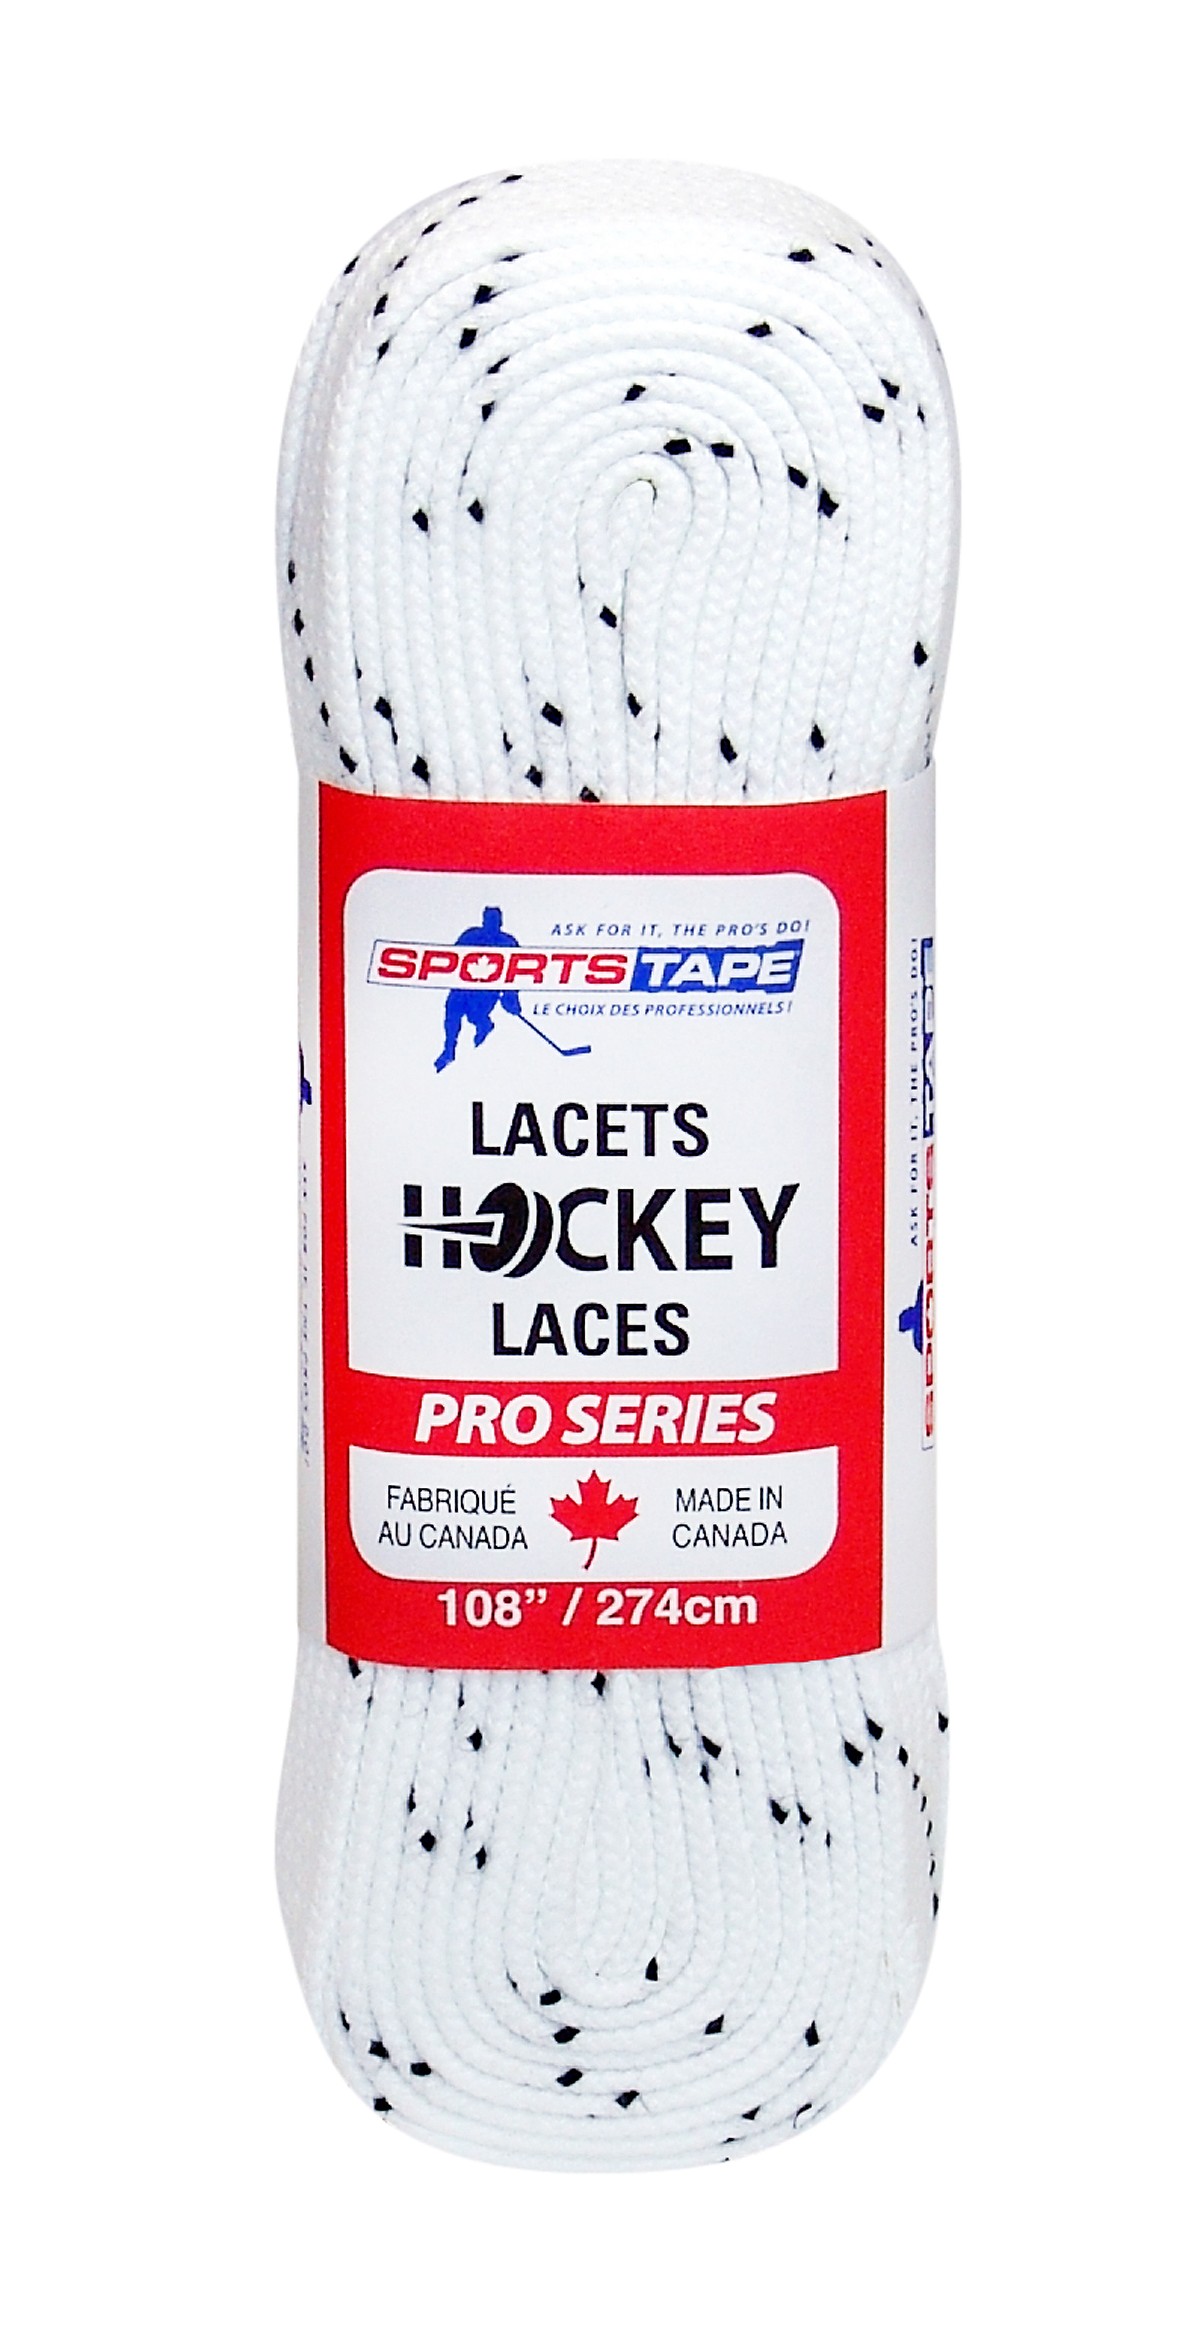 SPORTS TAPE HOCKEY LACES PRO SERIES 108” MADE IN CANADA 